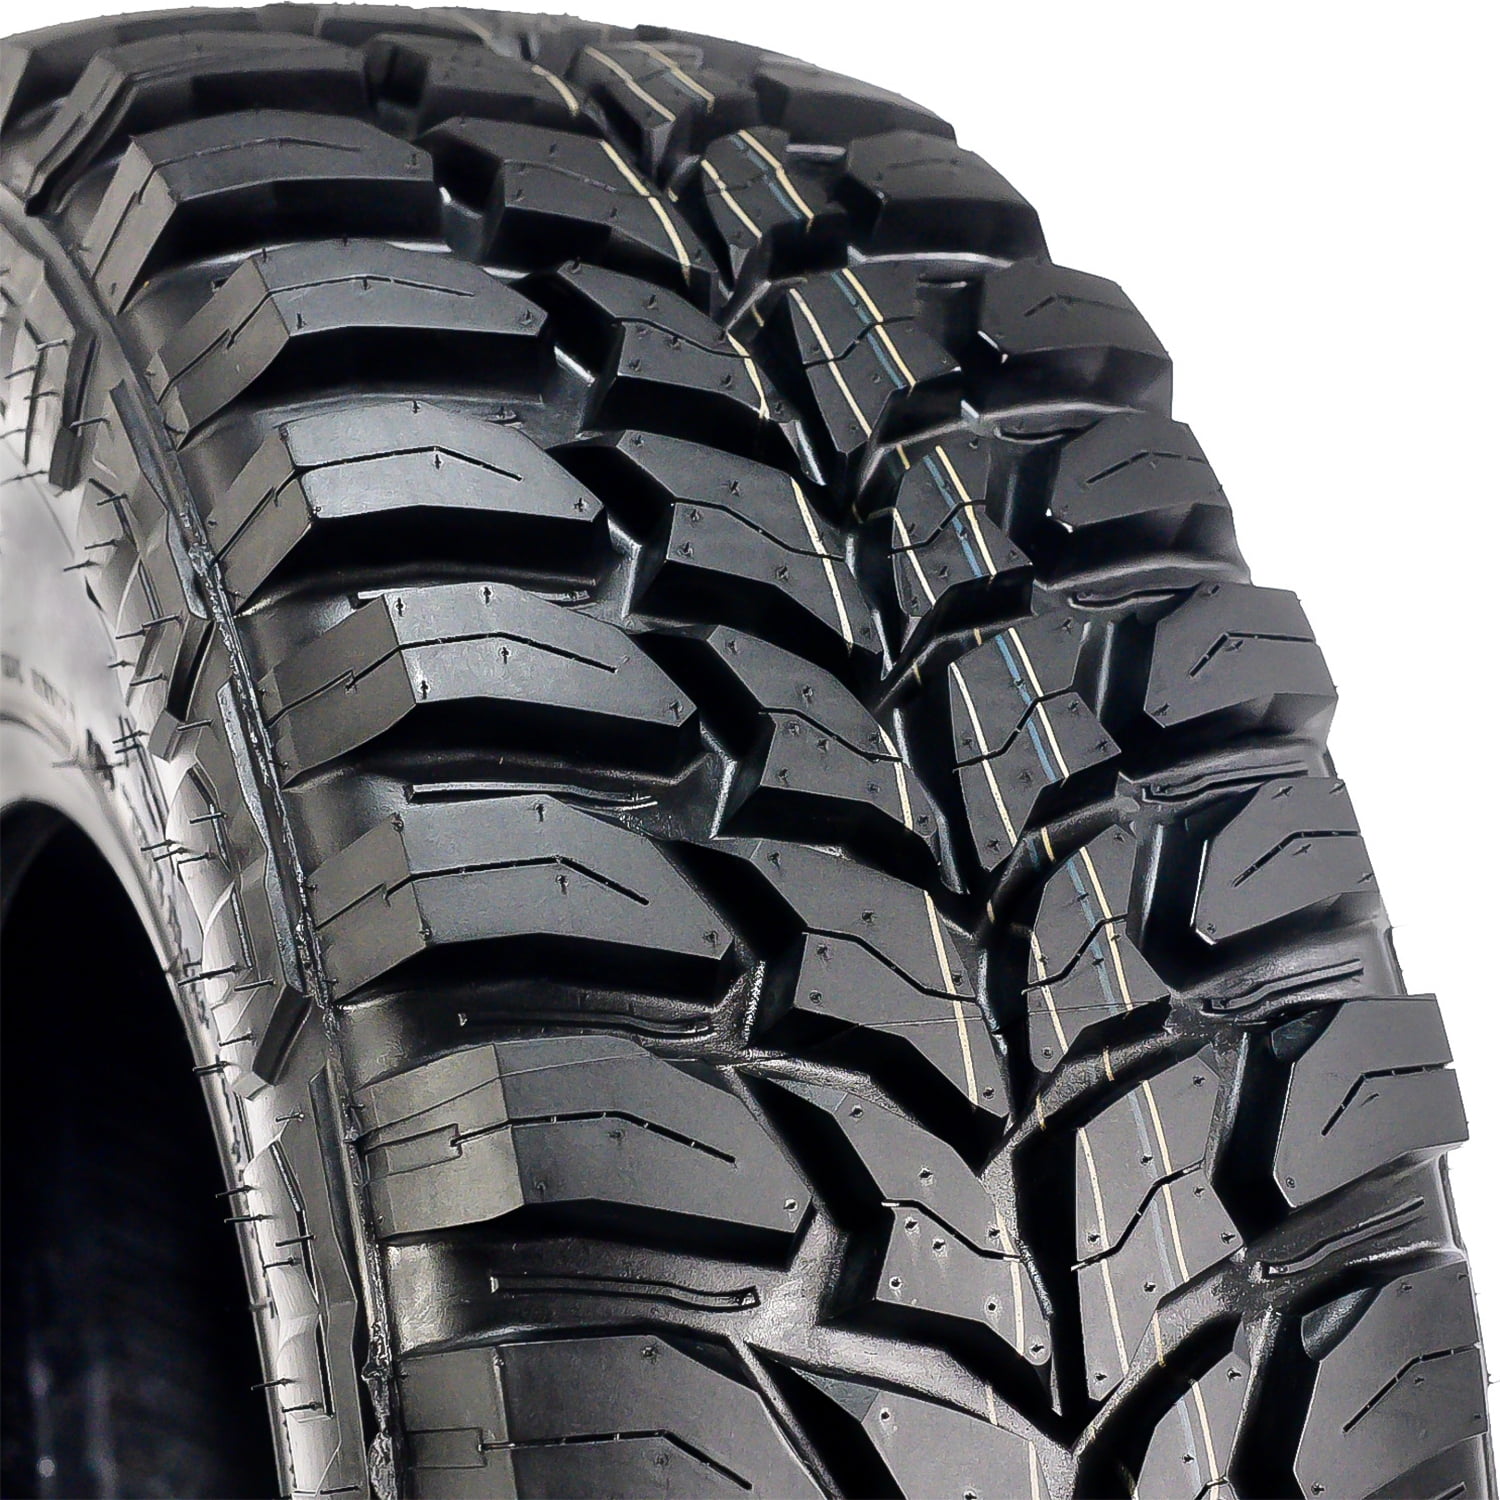 Road One Cavalry M/T Mud Tire RL1294 285 65 18 LT285/65R18 E Load Rated 